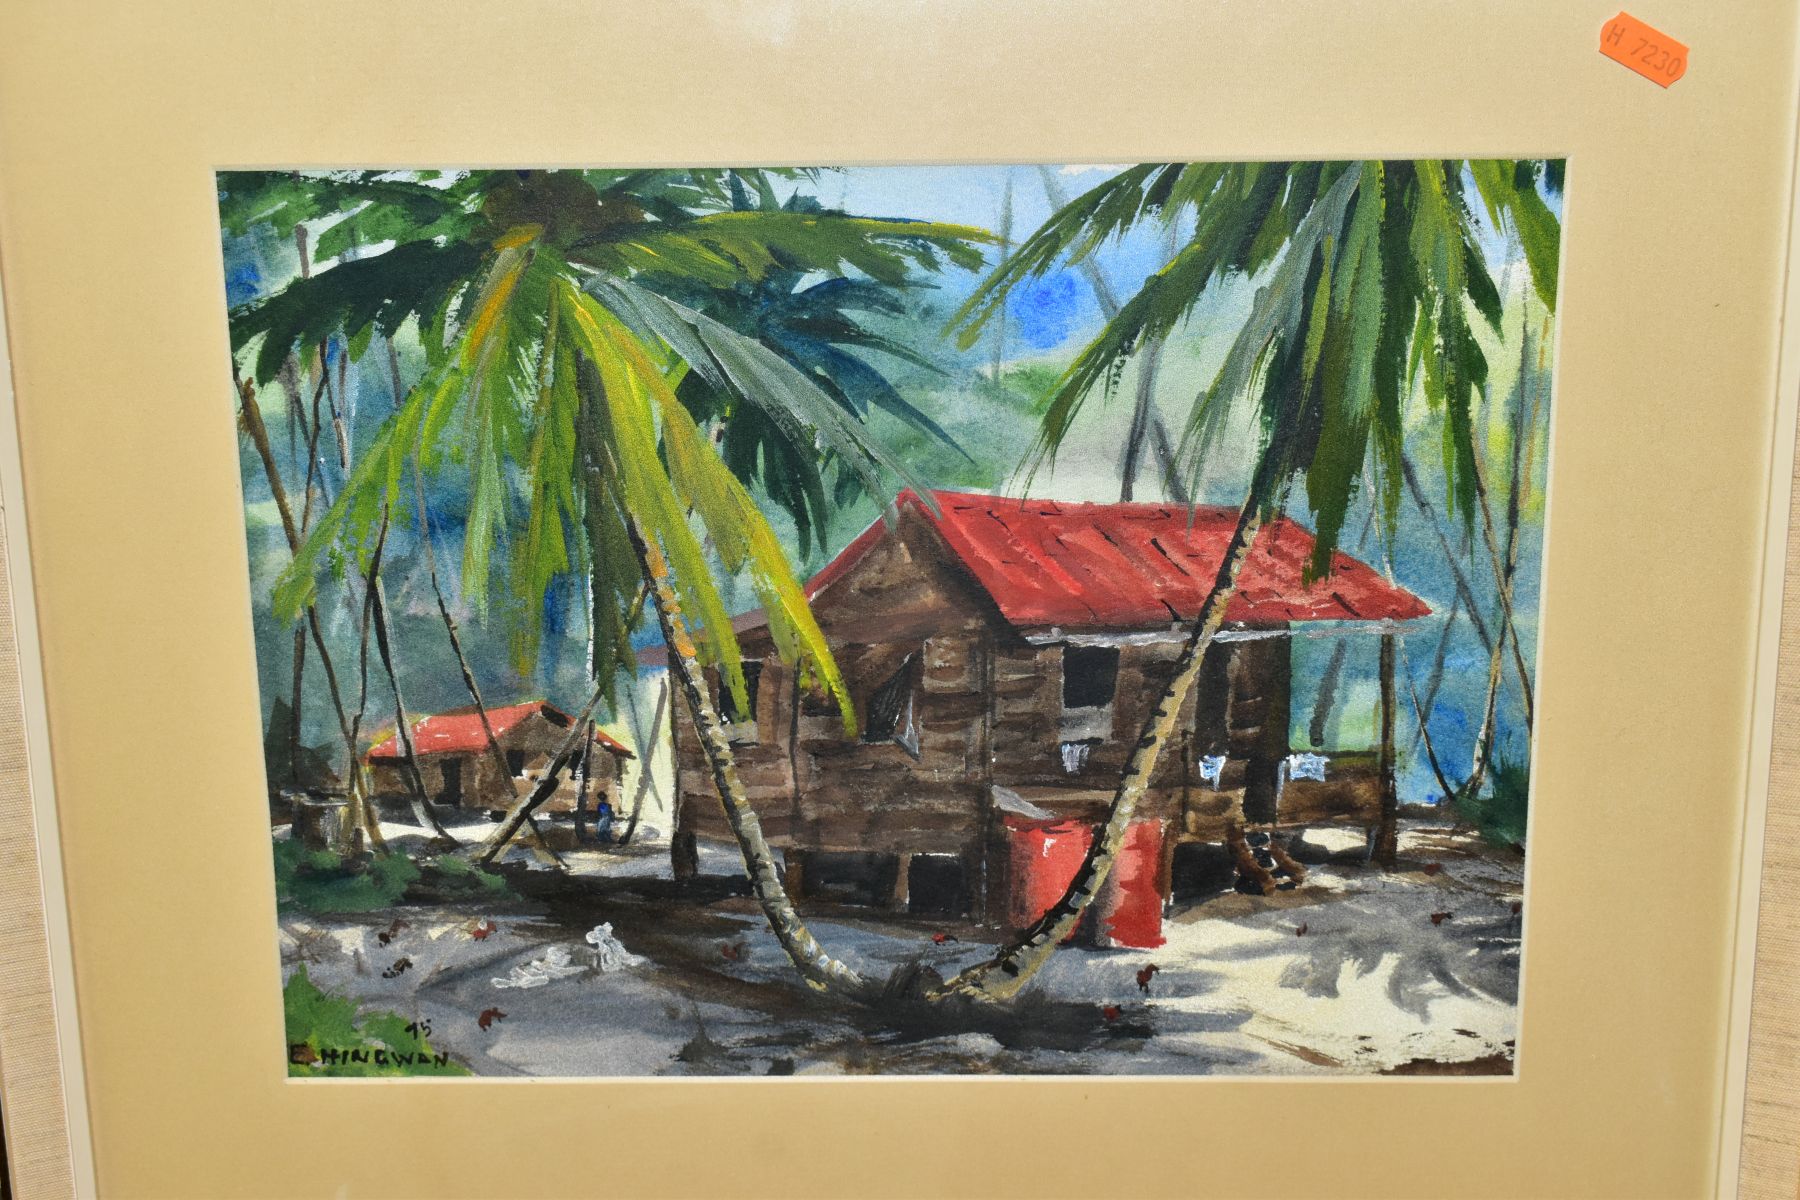 EDWIN HINGWAN (TRINIDAD 1932-1976) BEACH HUTS AND PALM TREES, signed and dated (19)75 bottom left, - Image 2 of 4